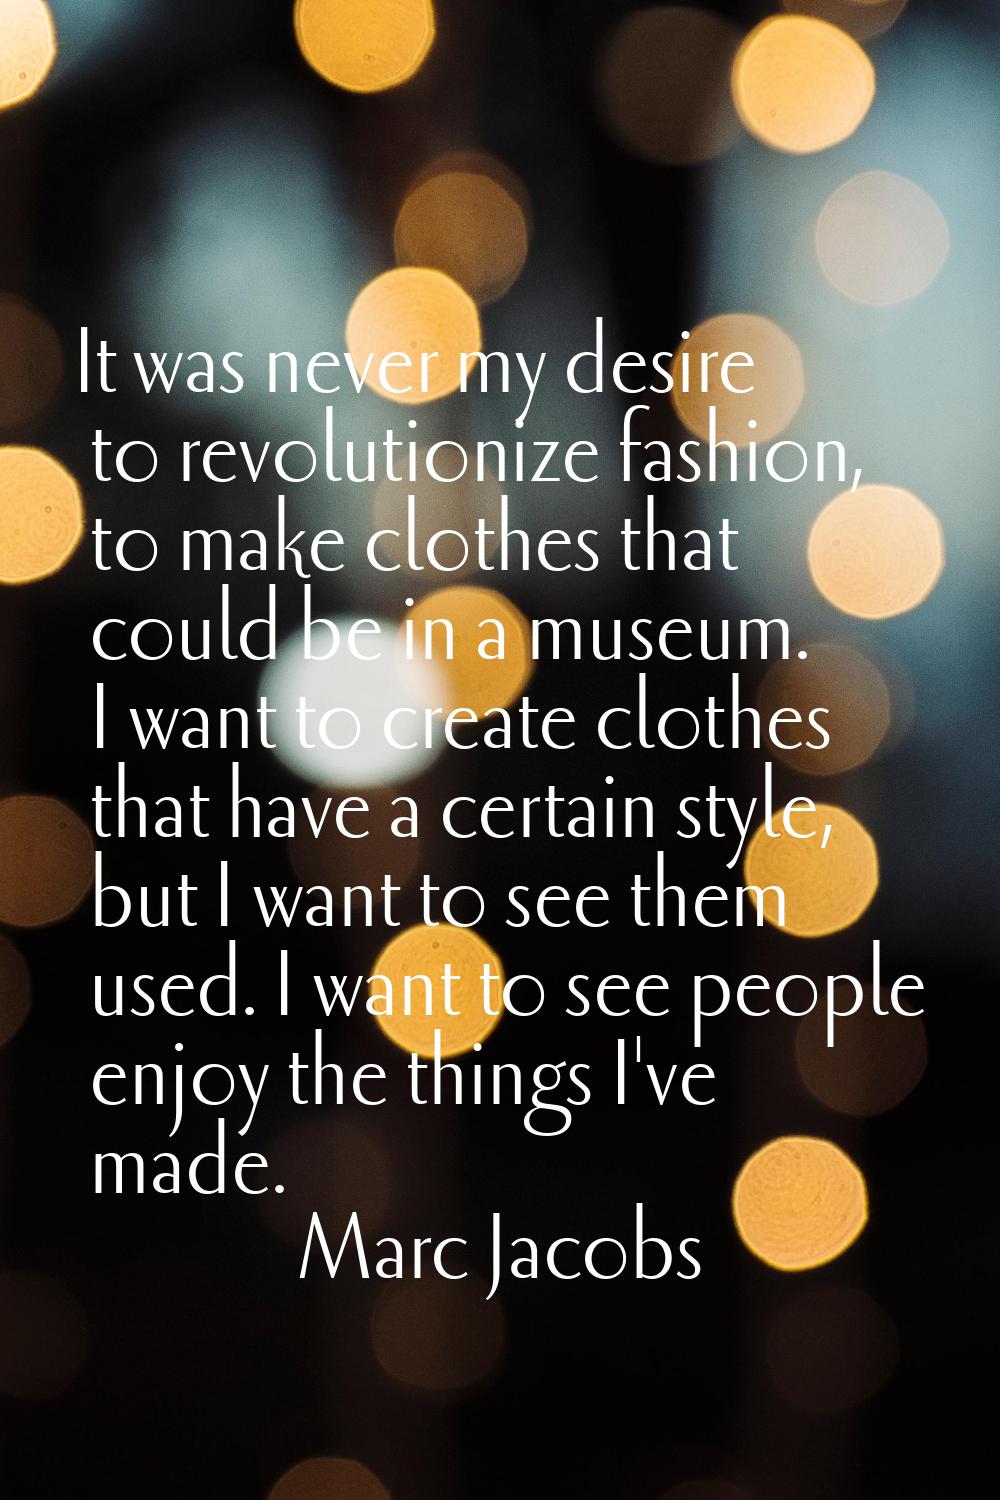 It was never my desire to revolutionize fashion, to make clothes that could be in a museum. I want 